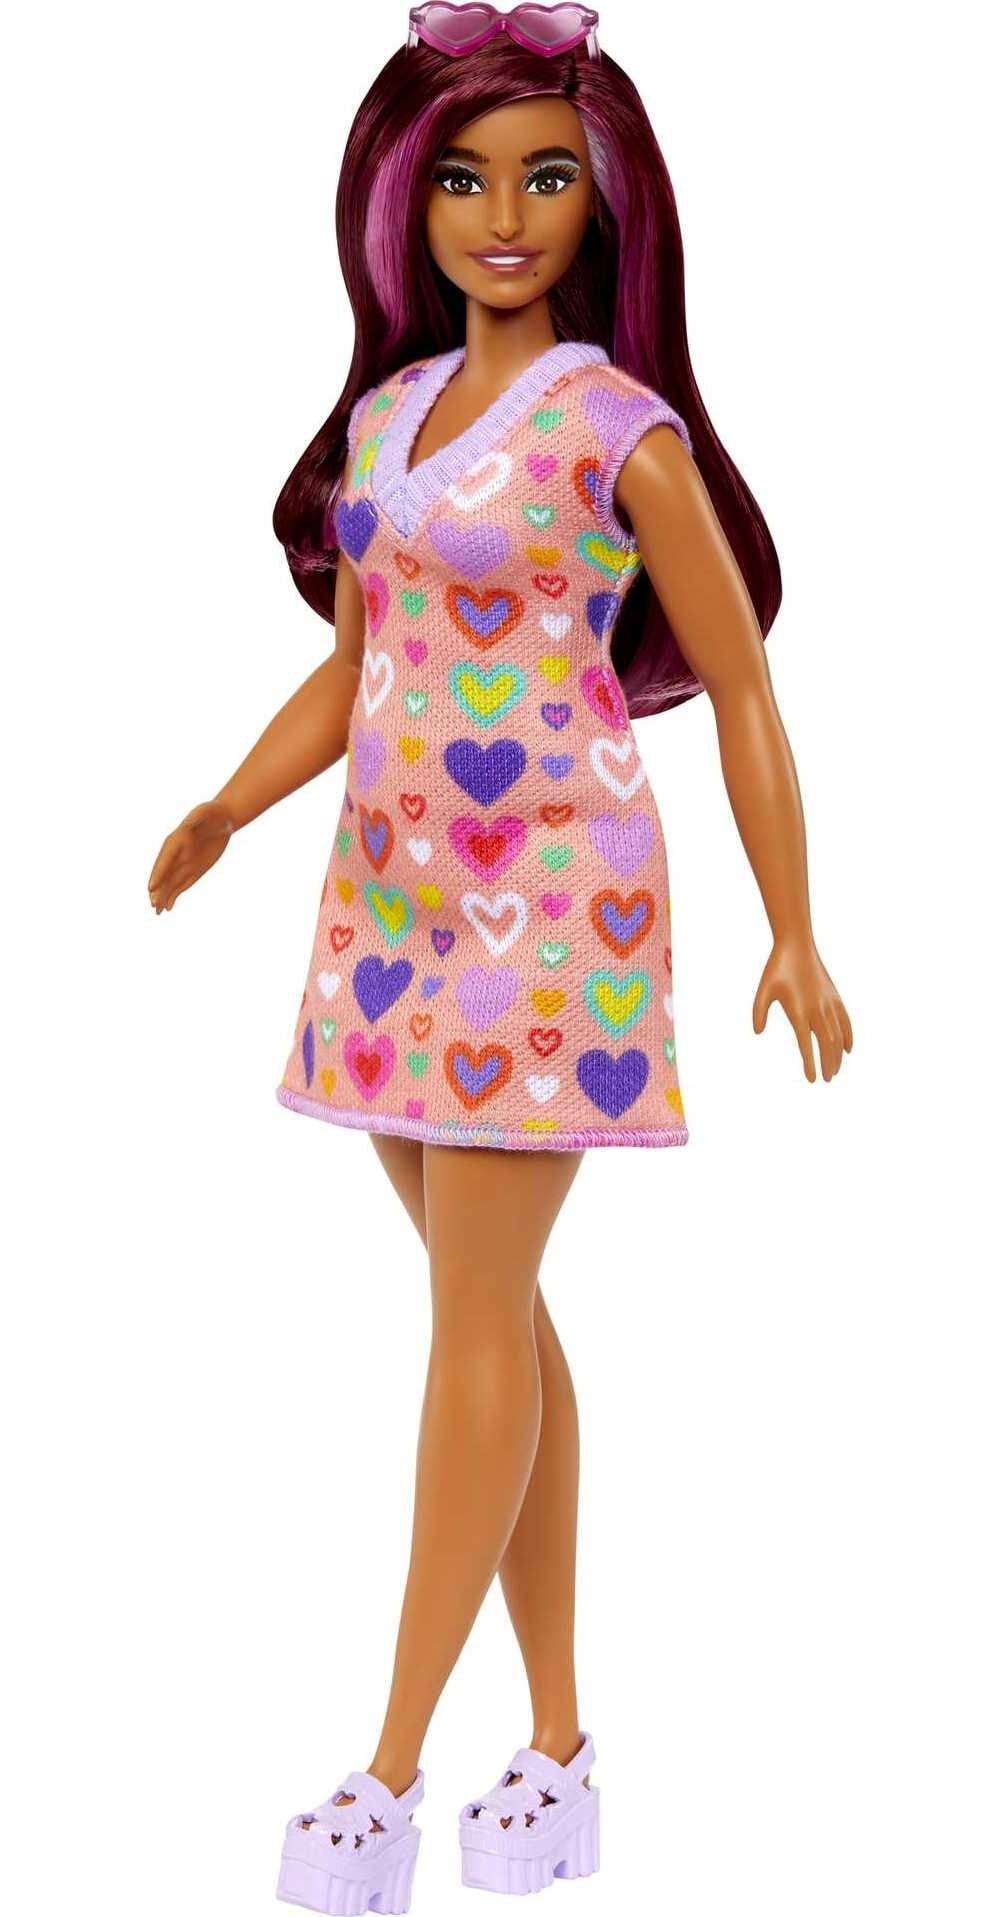 Barbie Fashionistas Doll #207 with Pink-Streaked Hair and Heart Dress ...